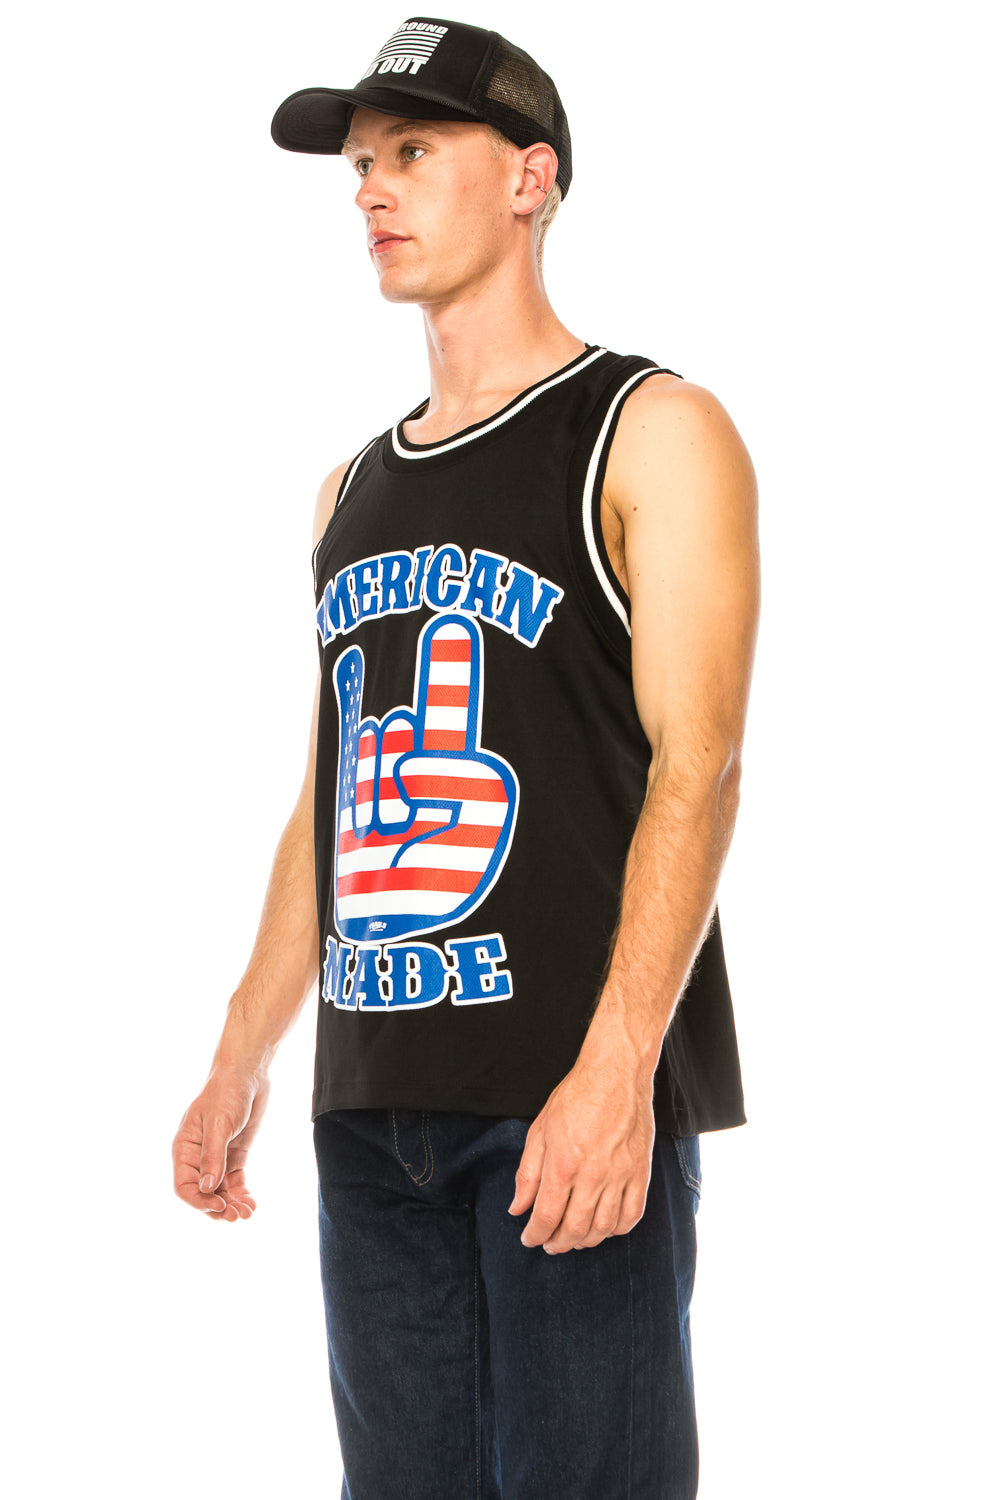 AMERICAN MADE BASKETBALL JERSEY - Trailsclothing.com